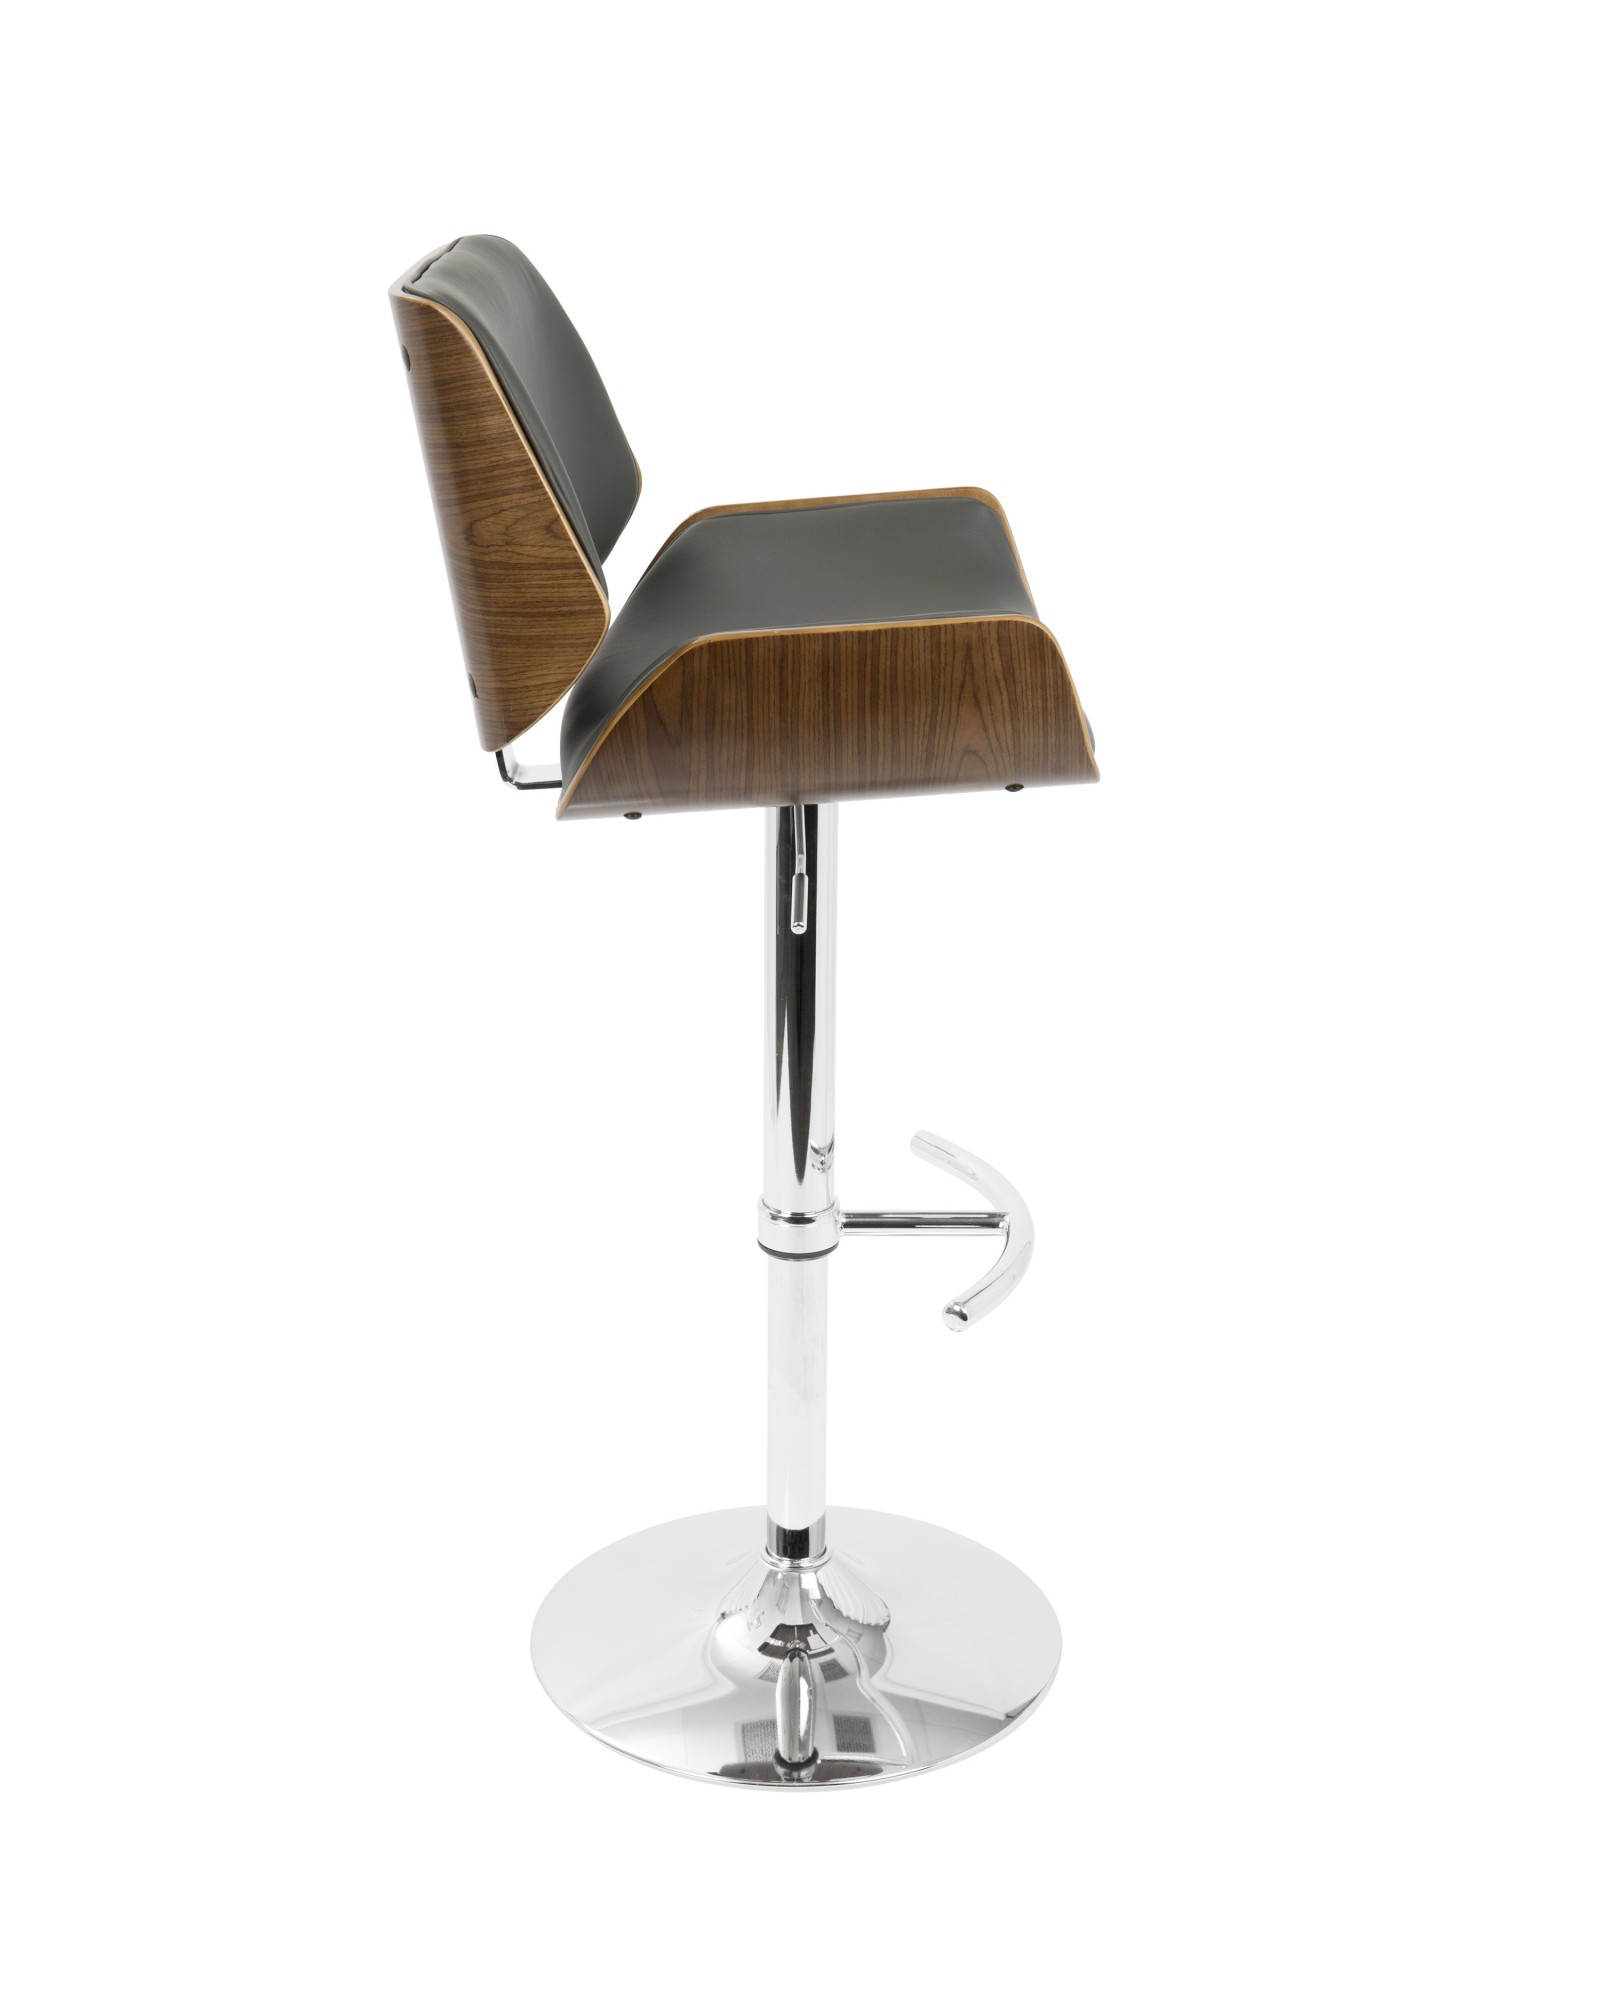 Santi Mid-Century Modern Adjustable Barstool with Swivel in Walnut and Grey Faux Leather